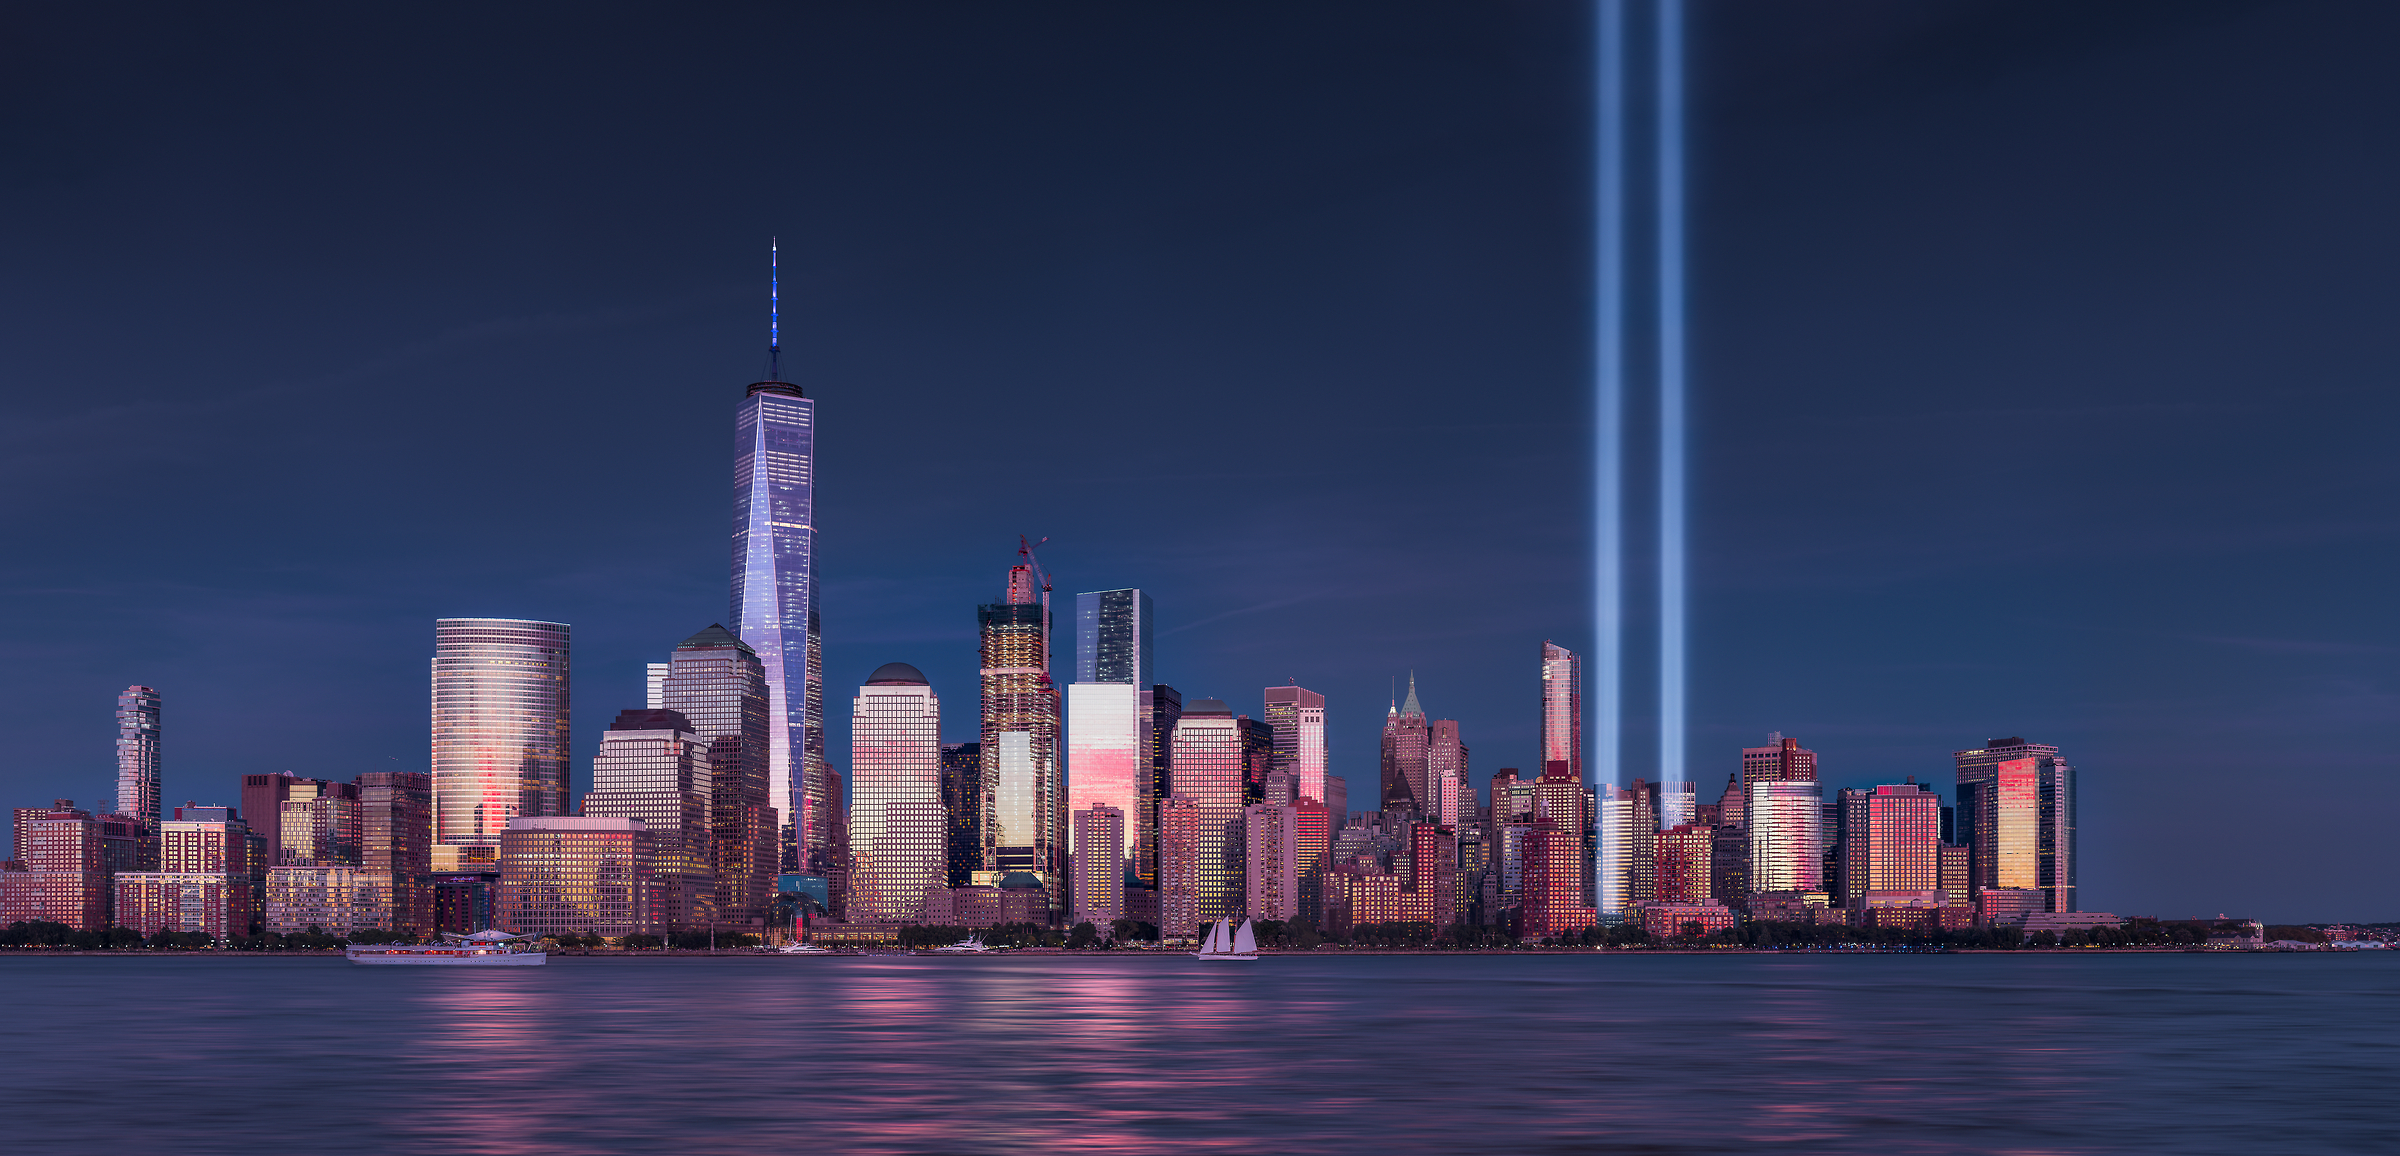 597 megapixels! The highest resolution VAST photo of the September 11th 9/11 Tribute in Light memorial, the World Trade Center, and the Manhattan city skyline at sunset in New York City; created by Dan Piech.